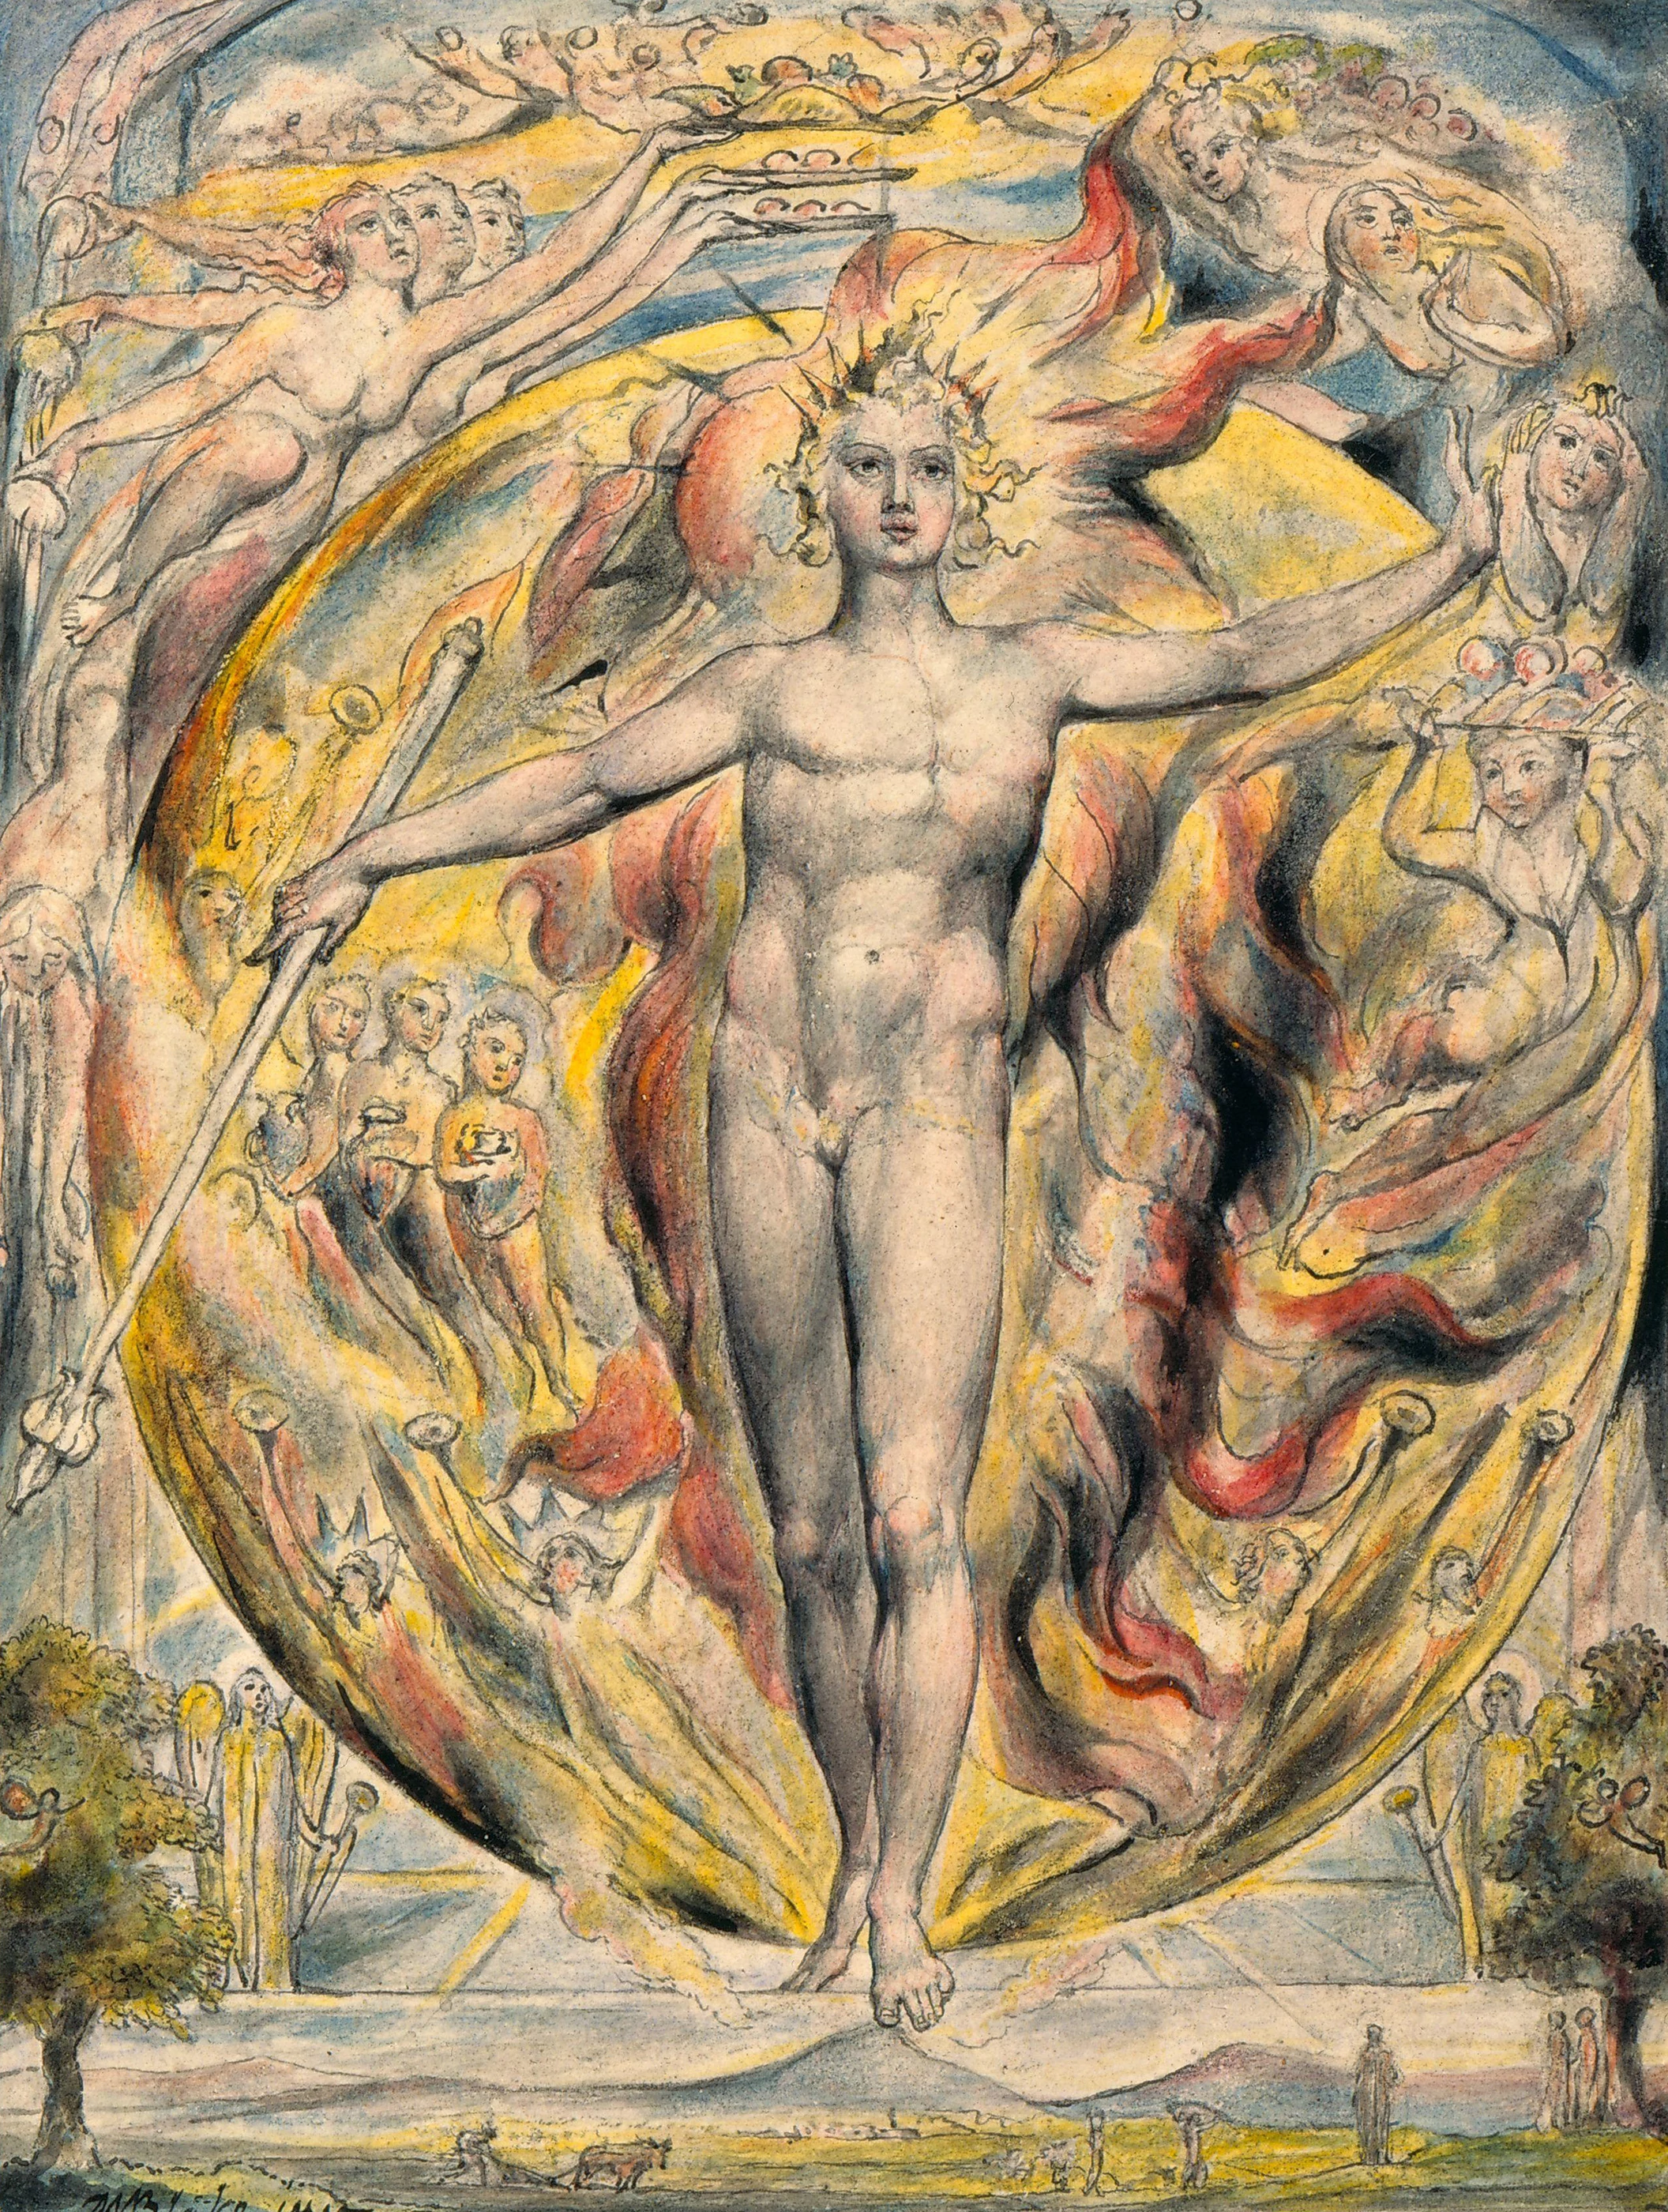 The Sun at his Eastern Gate, William Blake